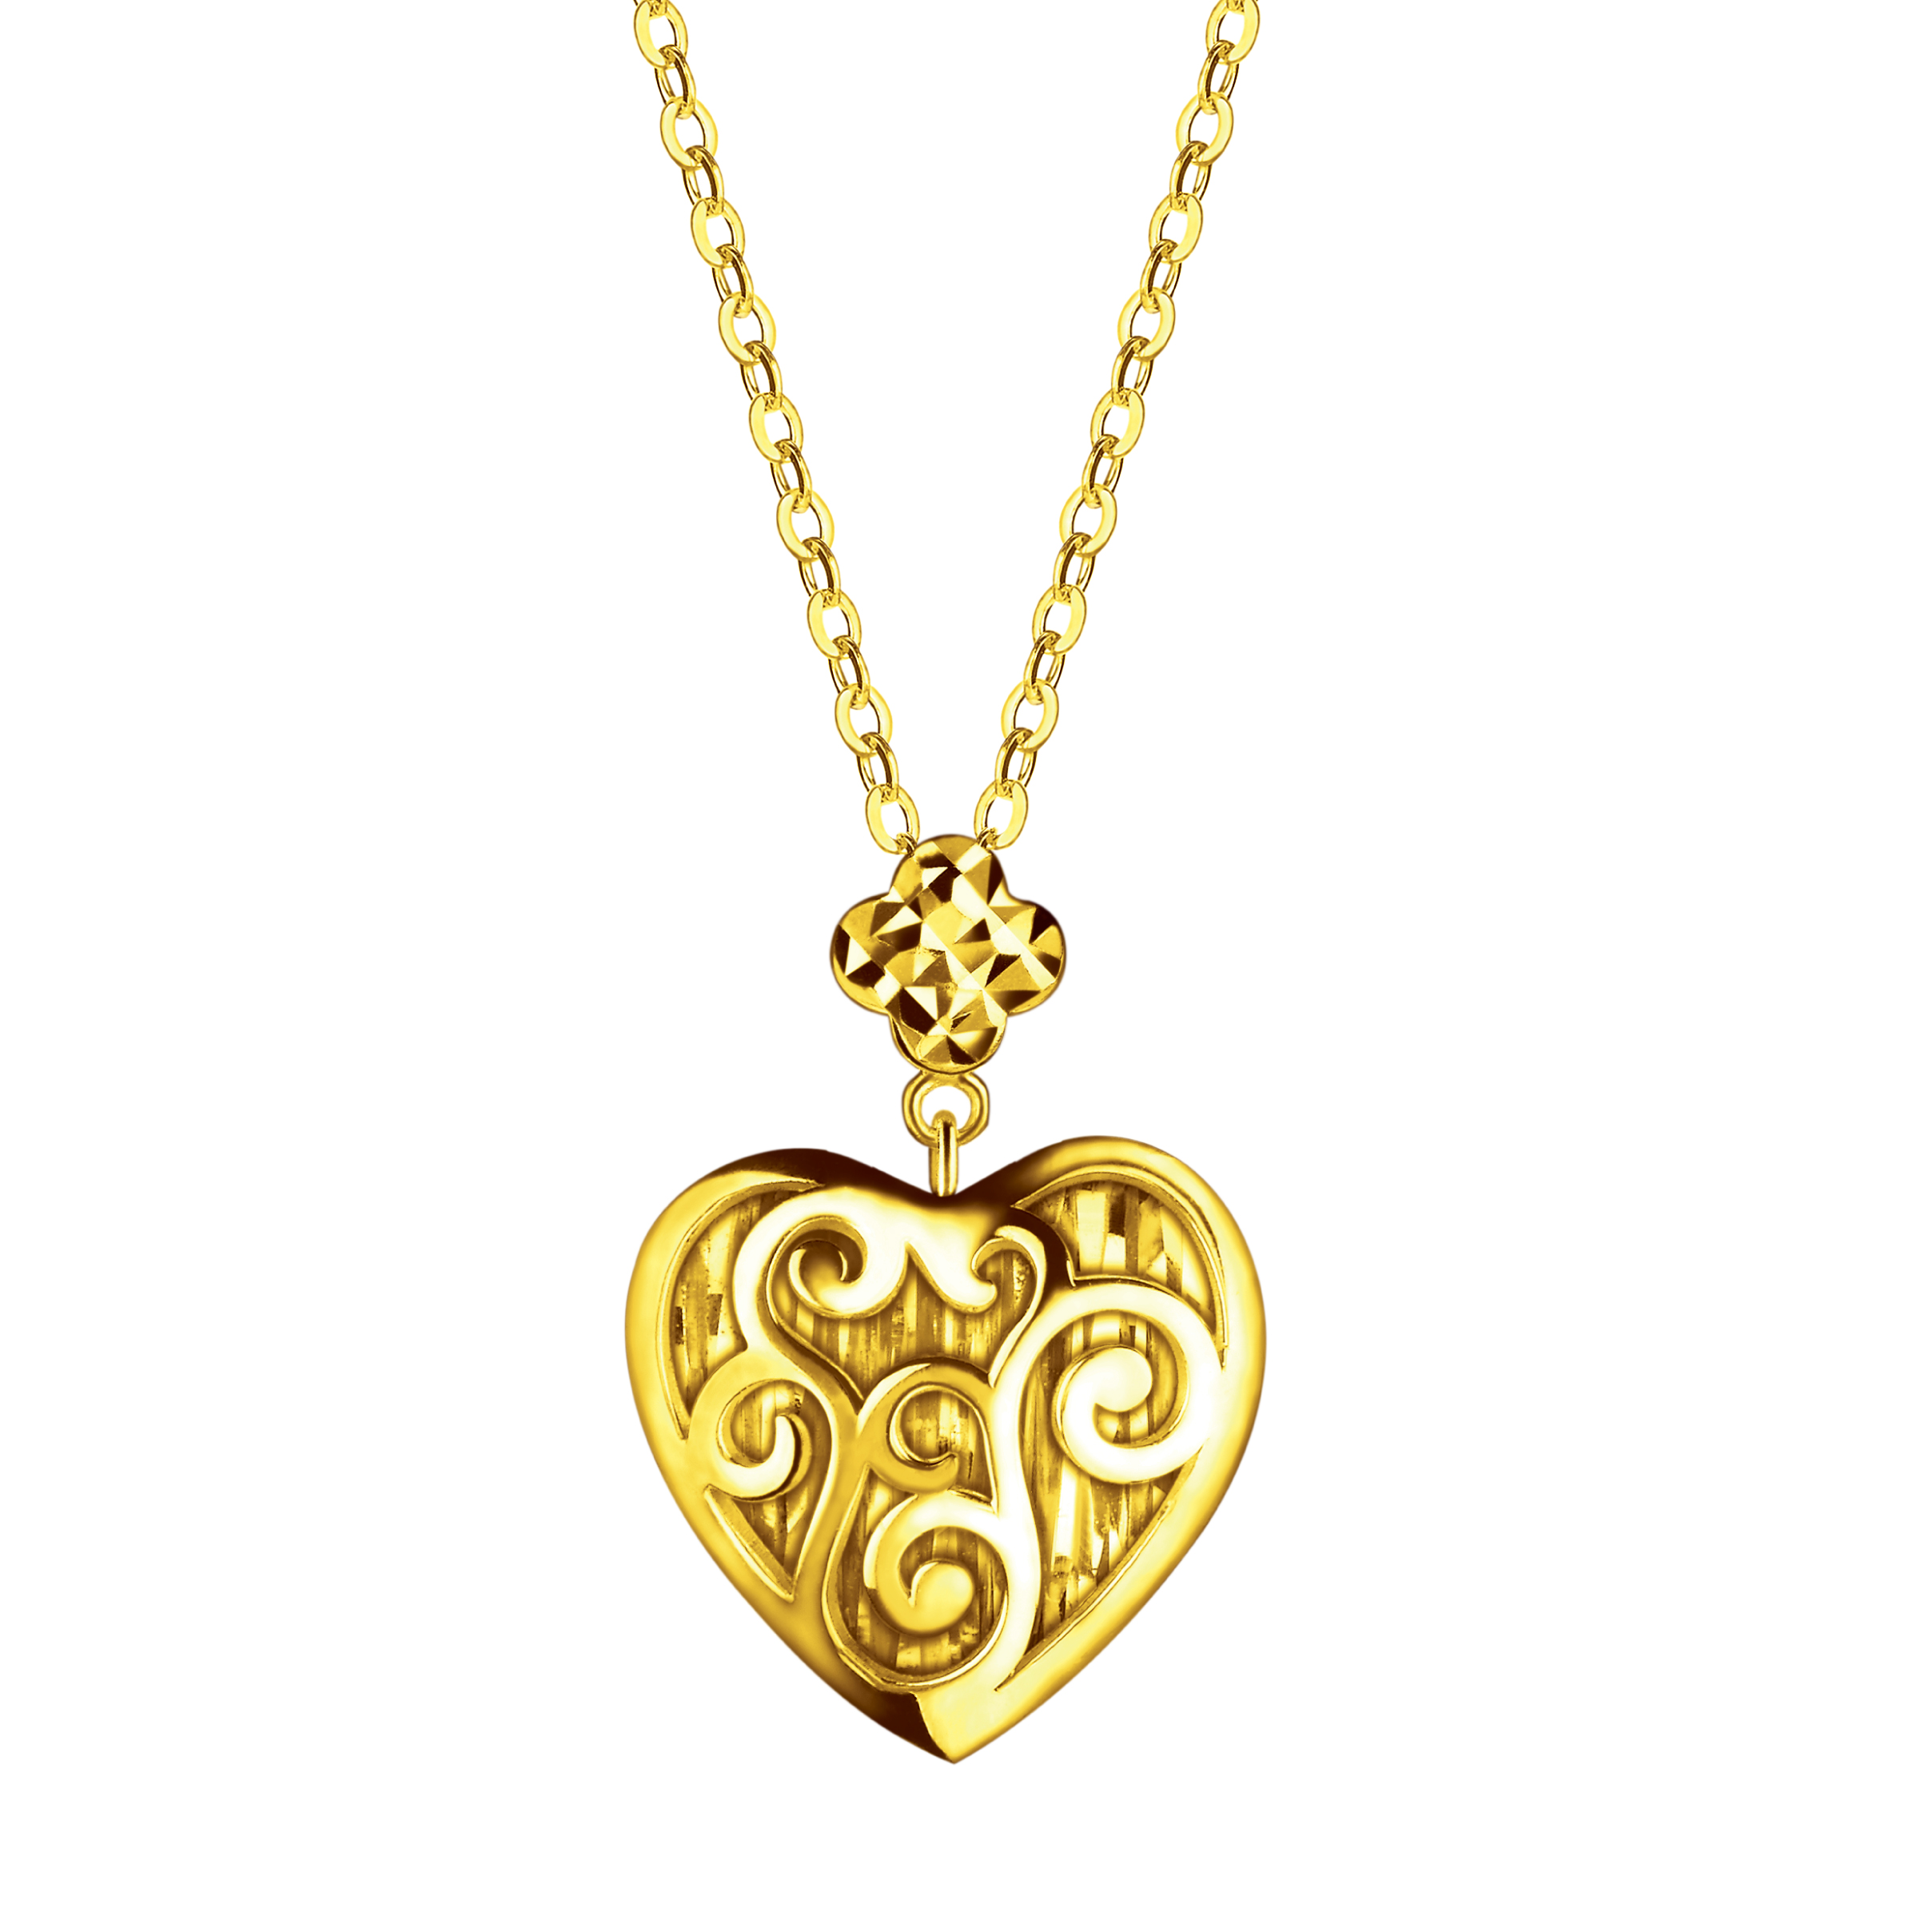 Goldstyle「Beating Heart」Pendant